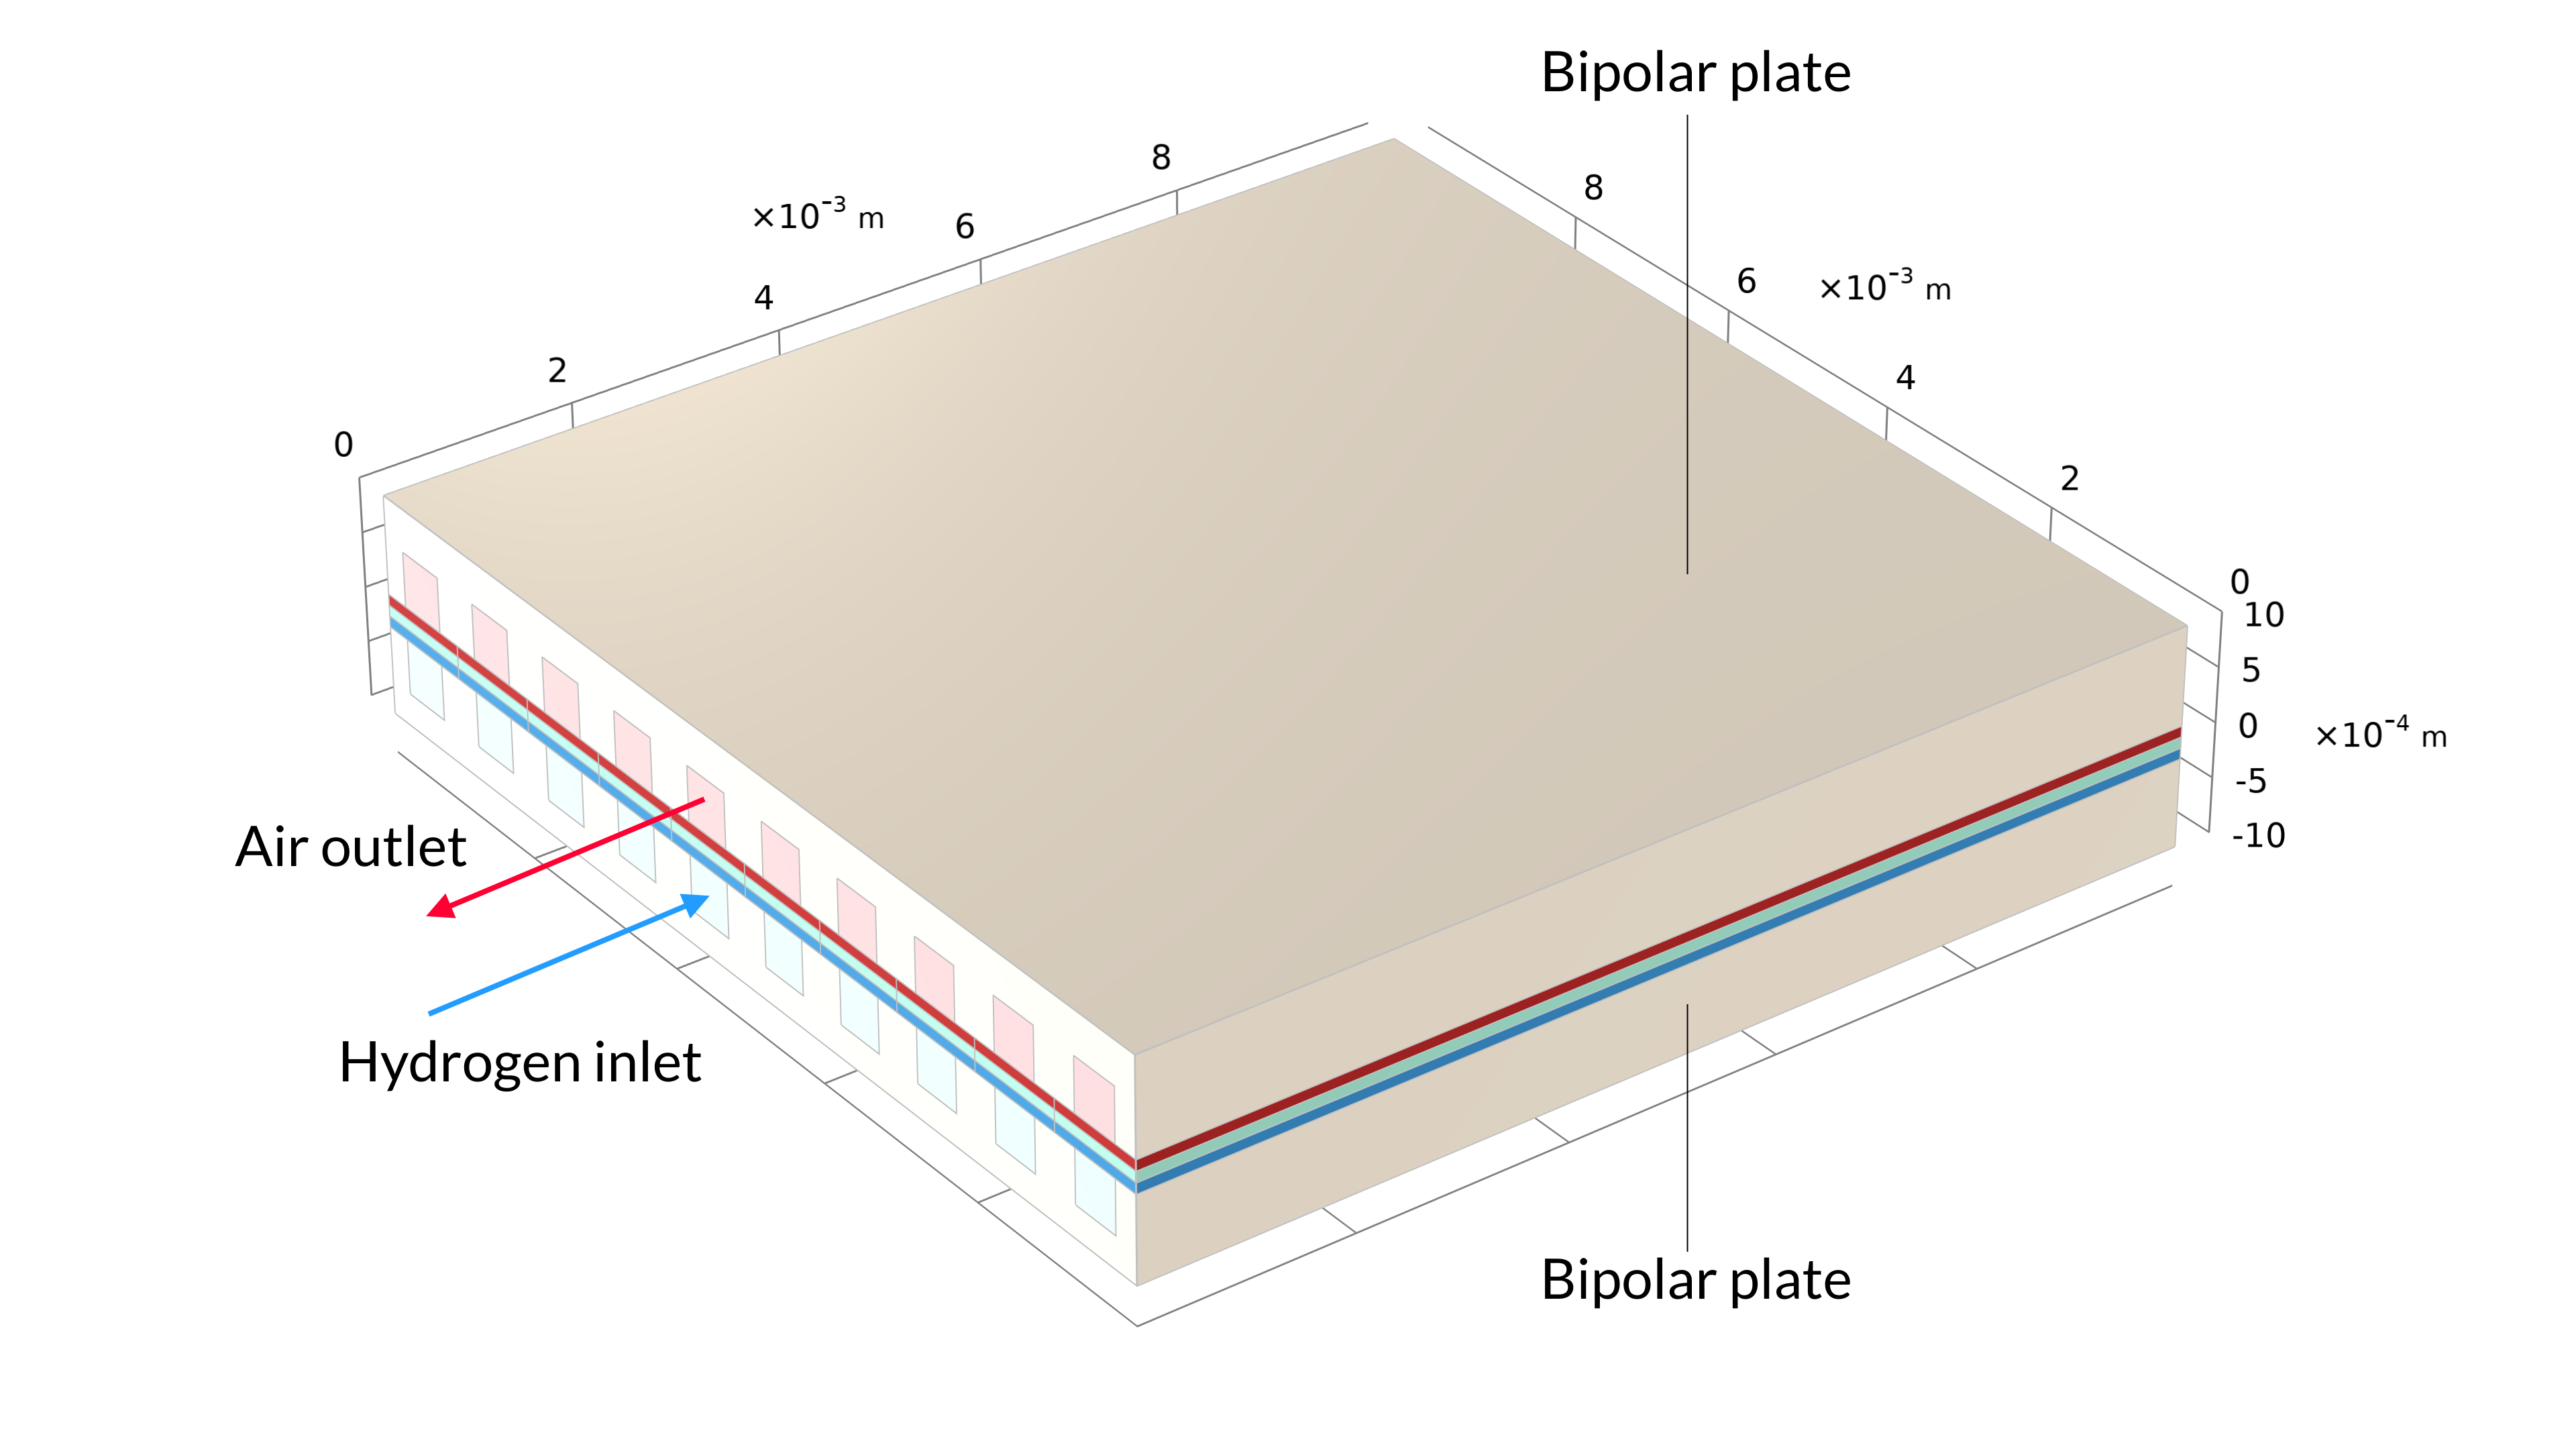 The geometry of the solid oxide fuel cell with the bipolar plates, air outlet, and hydrogen inlet labeled.